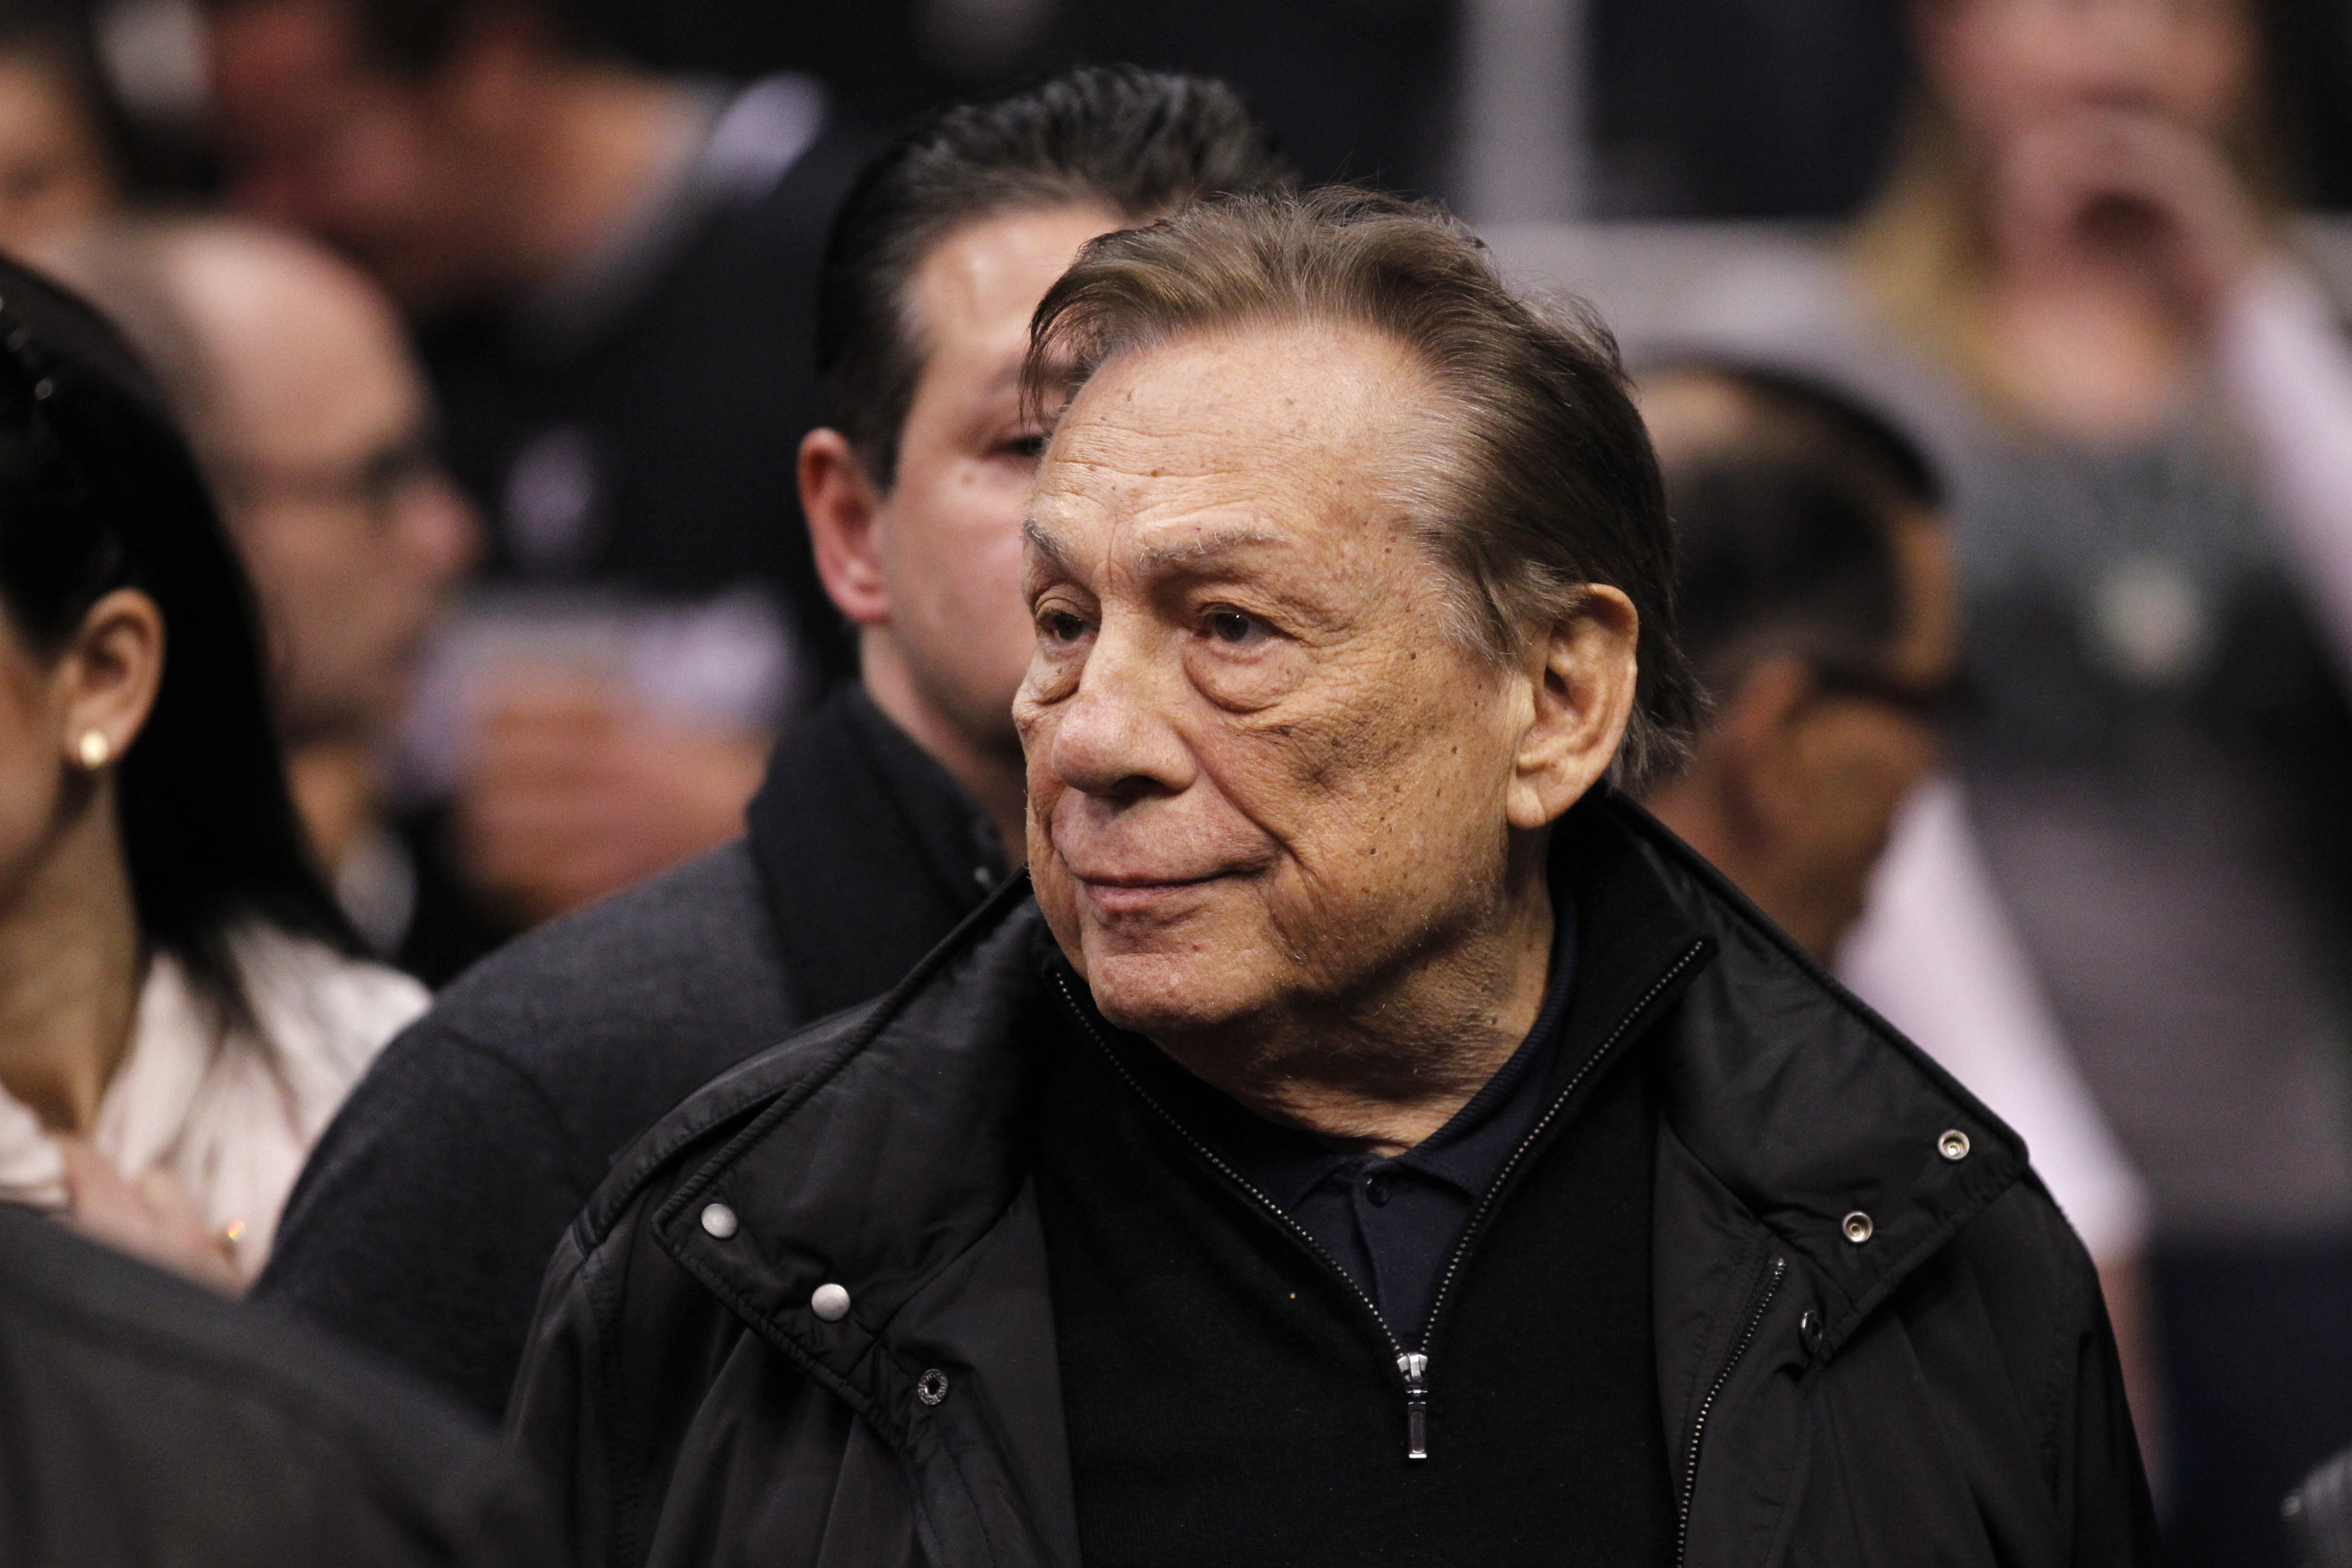 Los Angeles Clippers owner Donald Sterling at the NBA basketball game between the Boston Celtics and Los Angeles Clippers in Los Angeles on Dec. 27, 2012. (Landov)